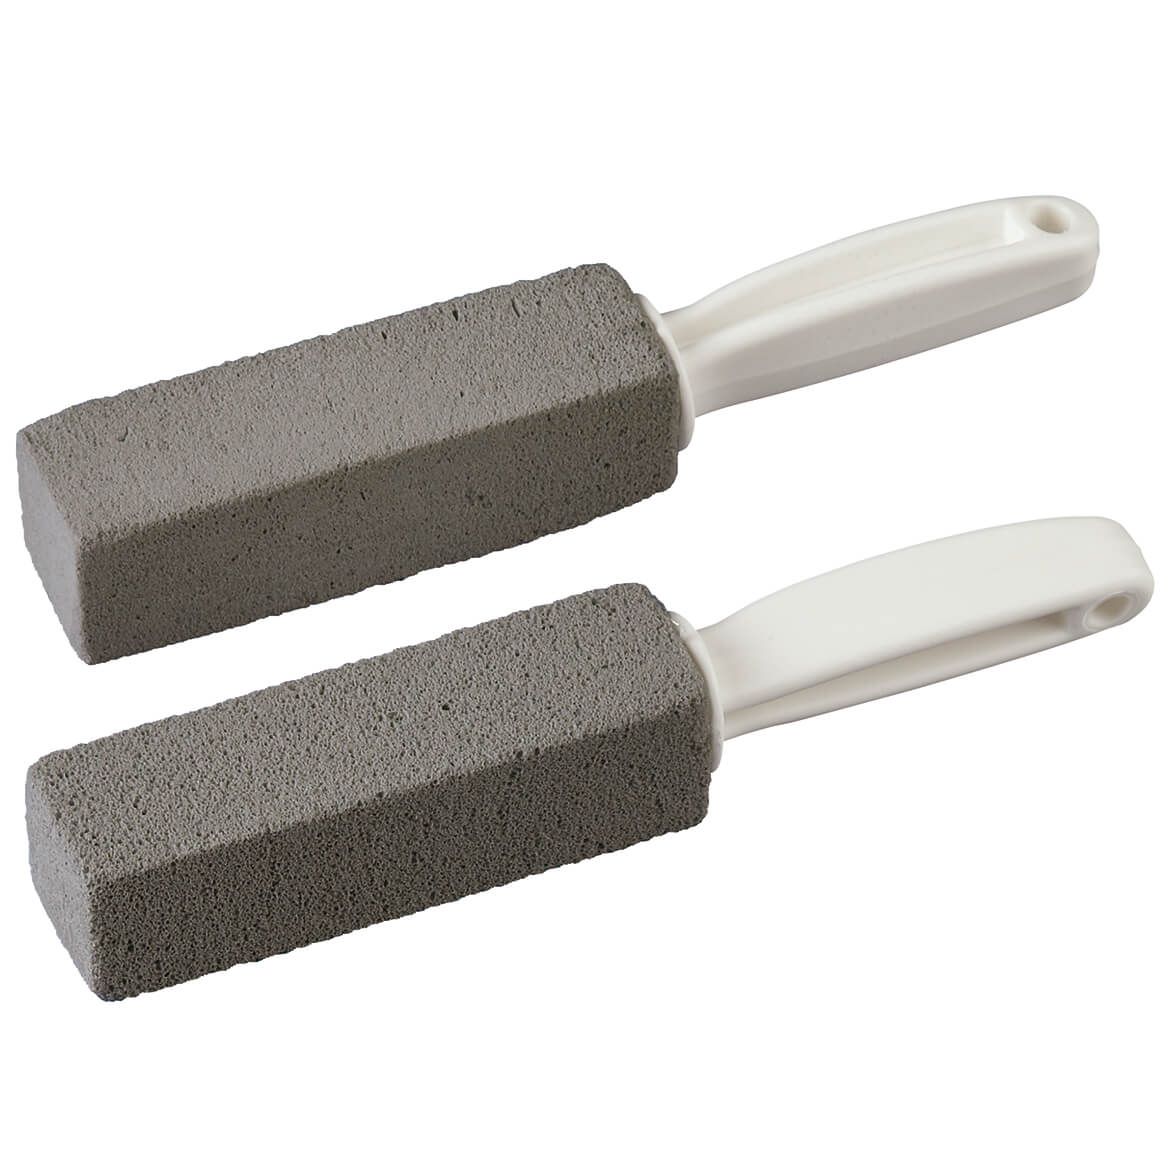 Pumice Stone Toilet Cleaner, Set of 2 + '-' + 375341